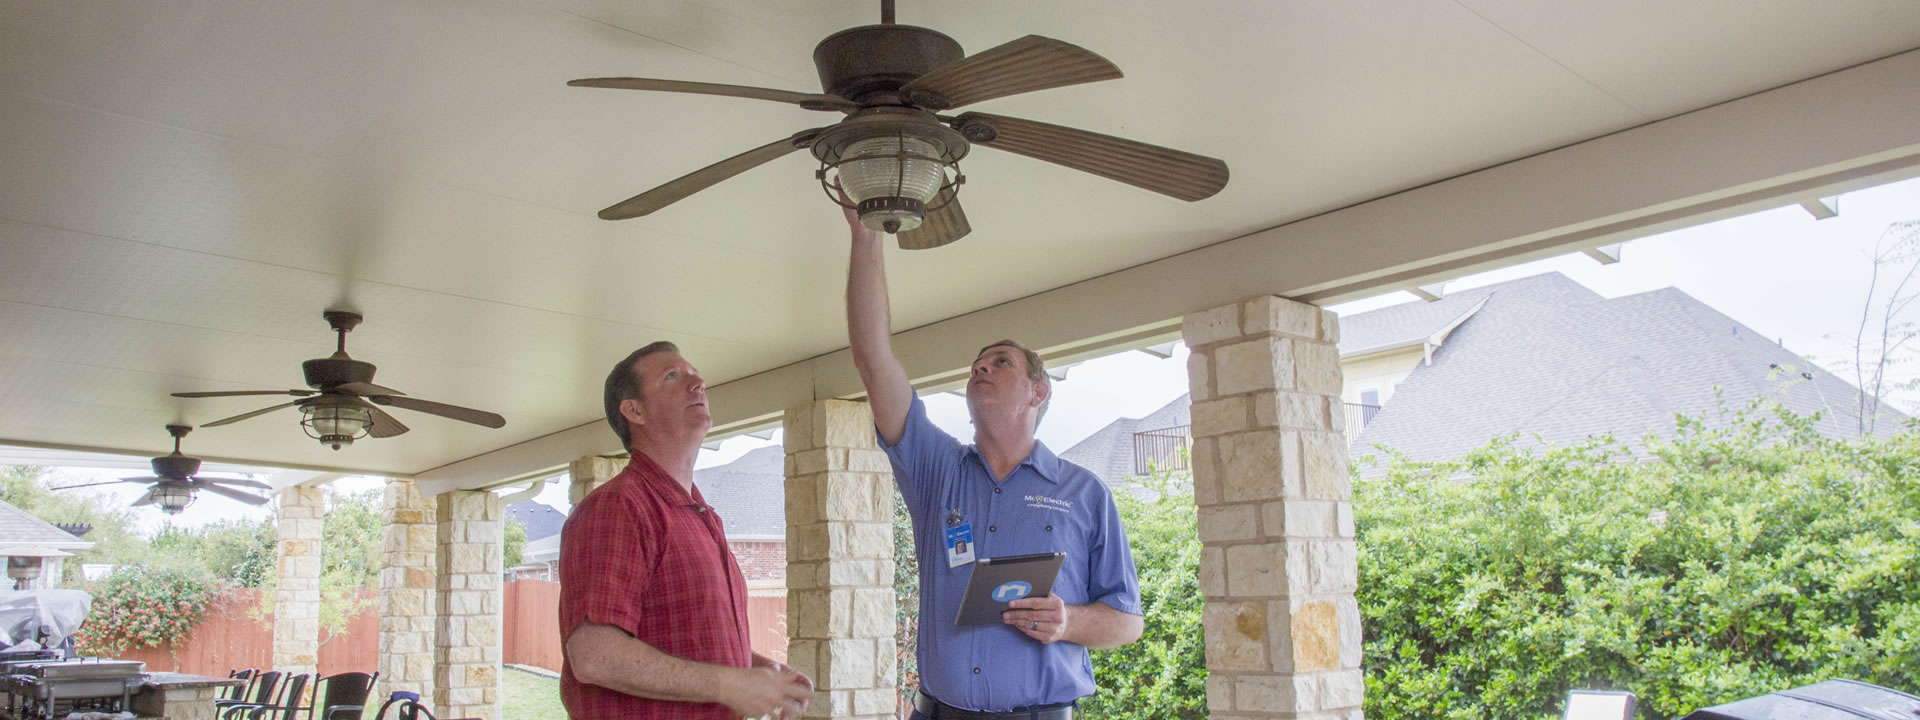 How to Clean Ceiling Fans Quickly and Safely